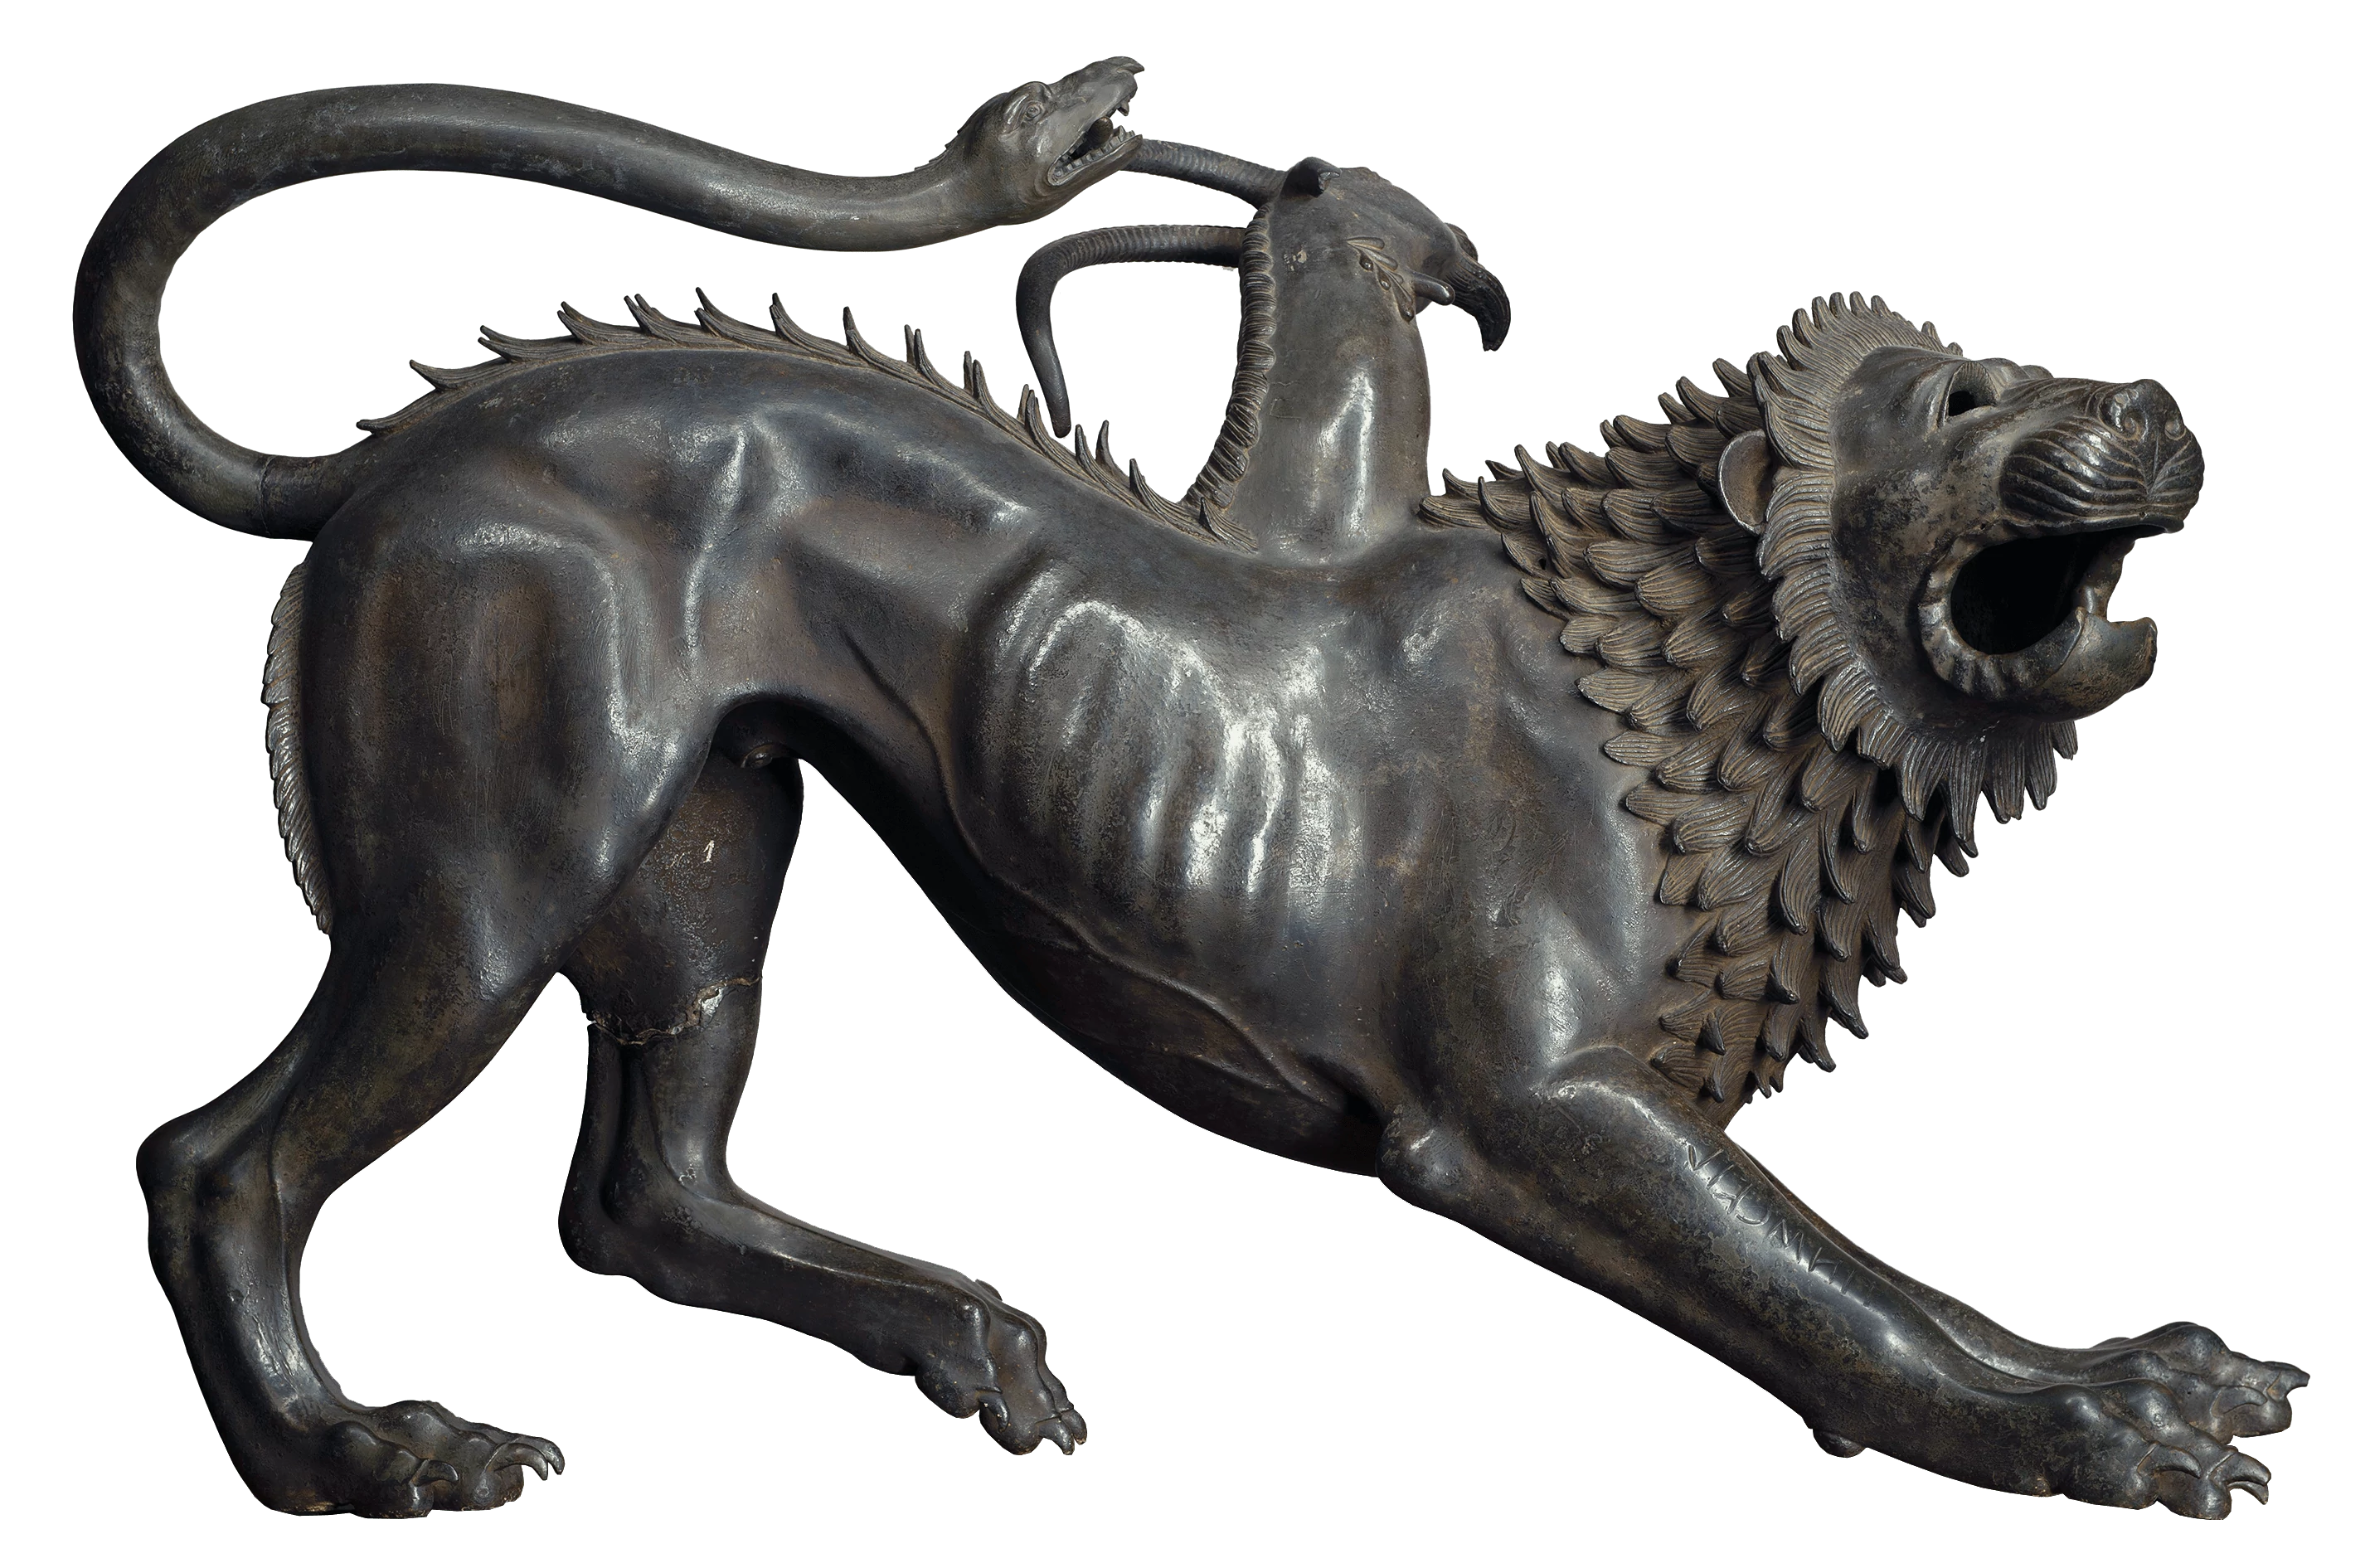 Chimera of Arezzo, The Etruscans